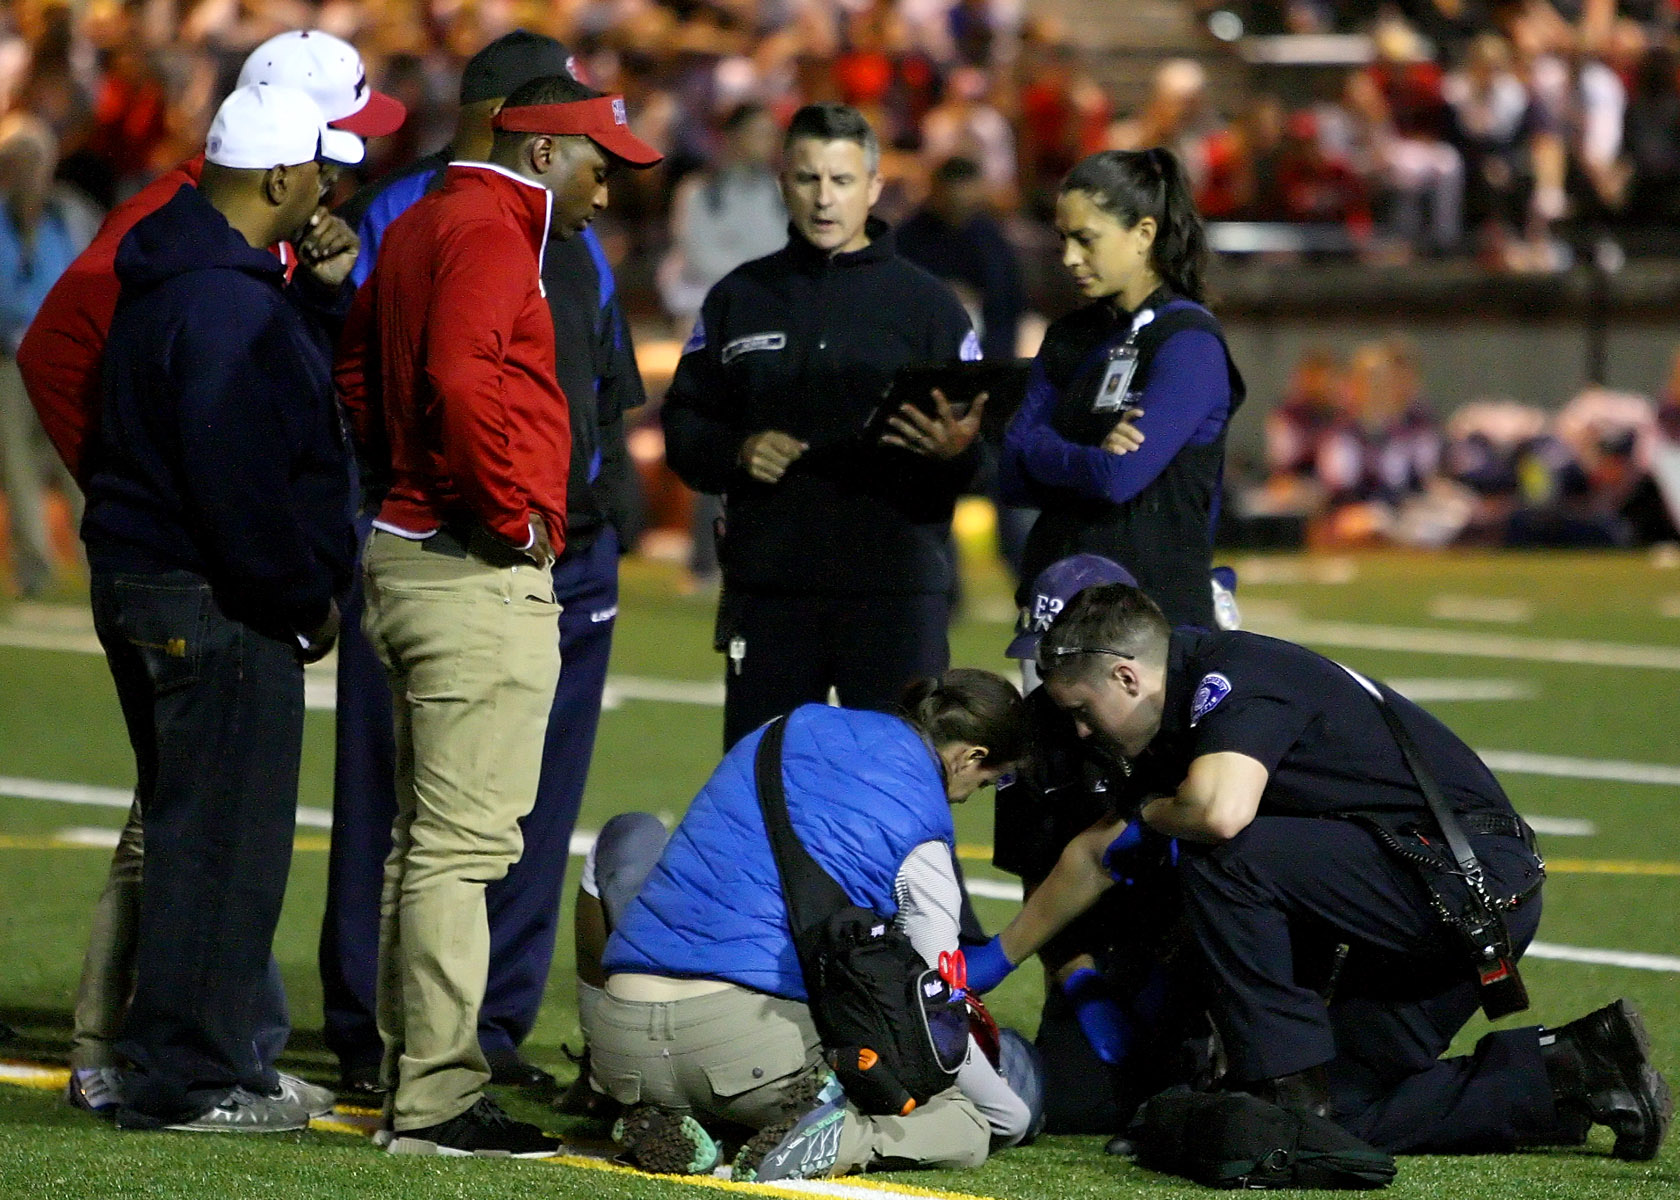  With 8 seconds to go before halftime Kennedy's Tre Holman is injured and medics are called in.